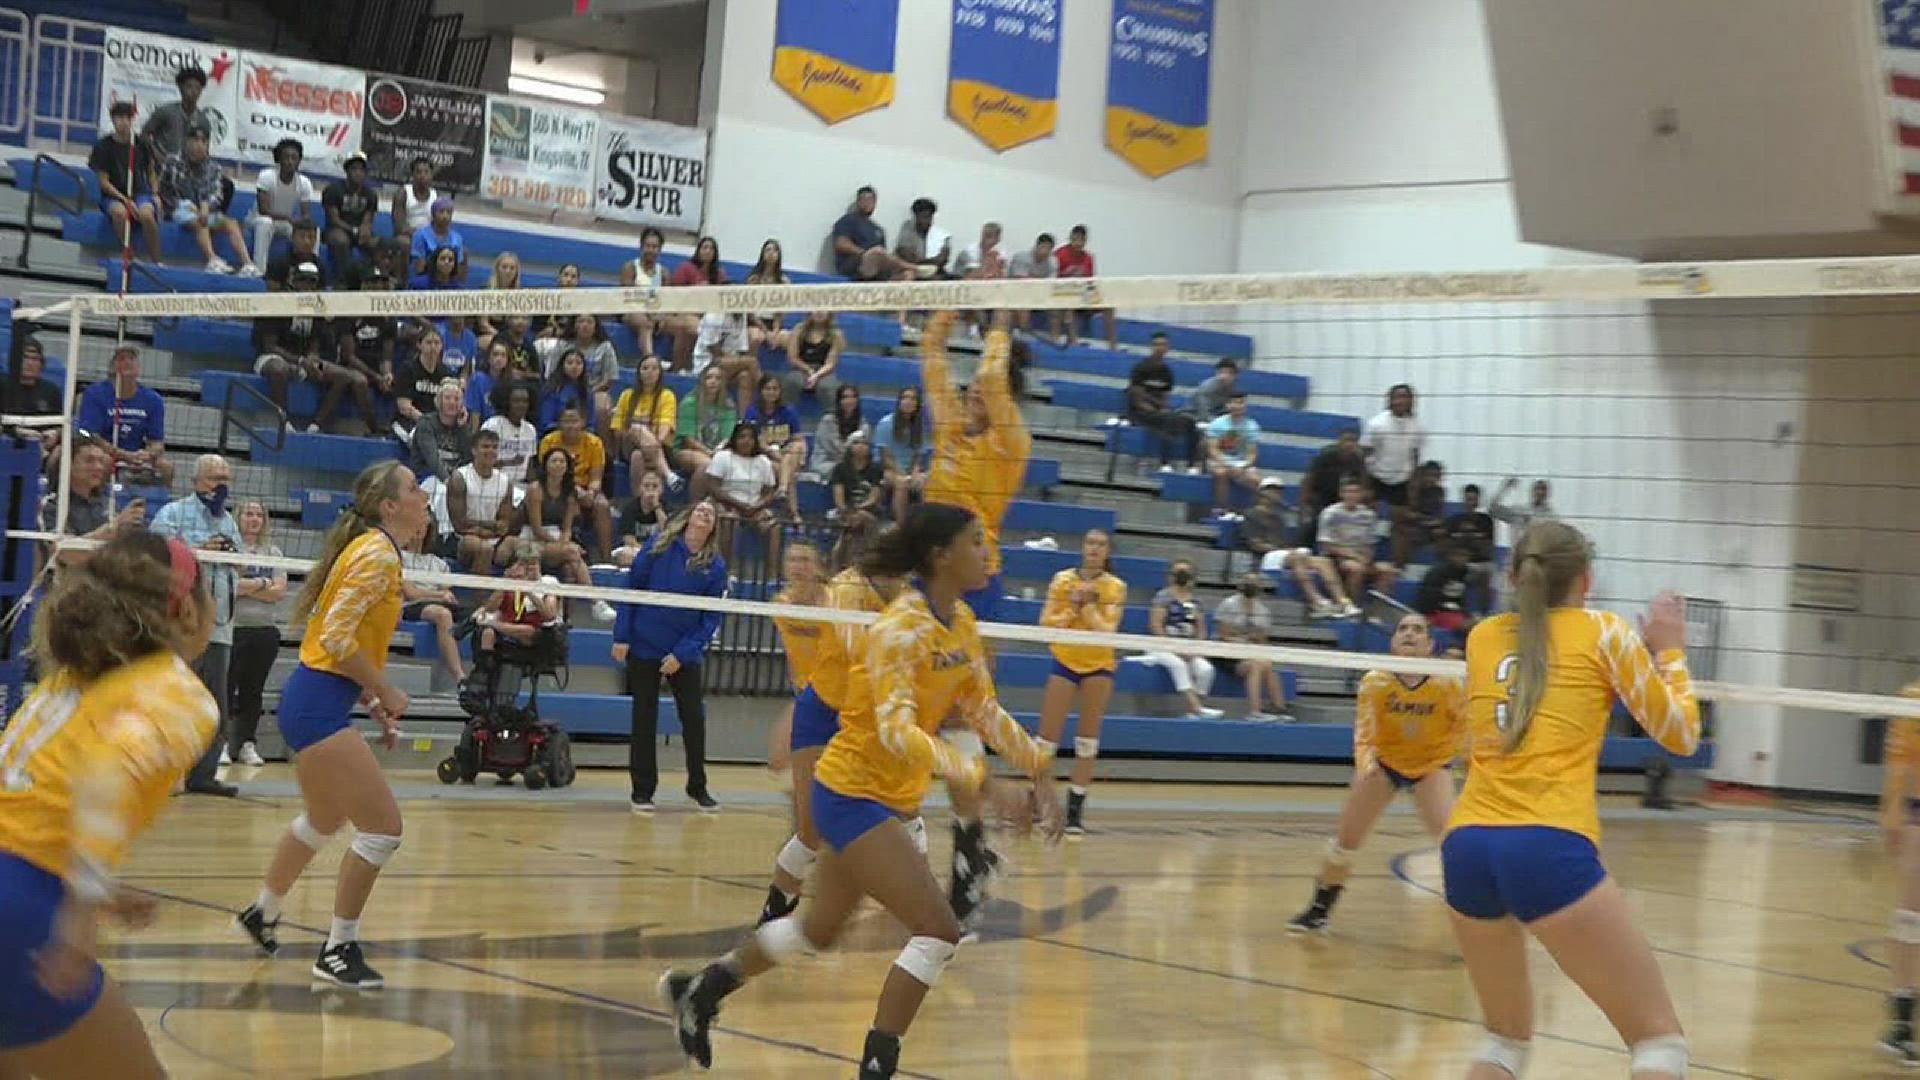 The Javelinas have their first match up, away on September 3rd against Western Colorado at 10 a.m.